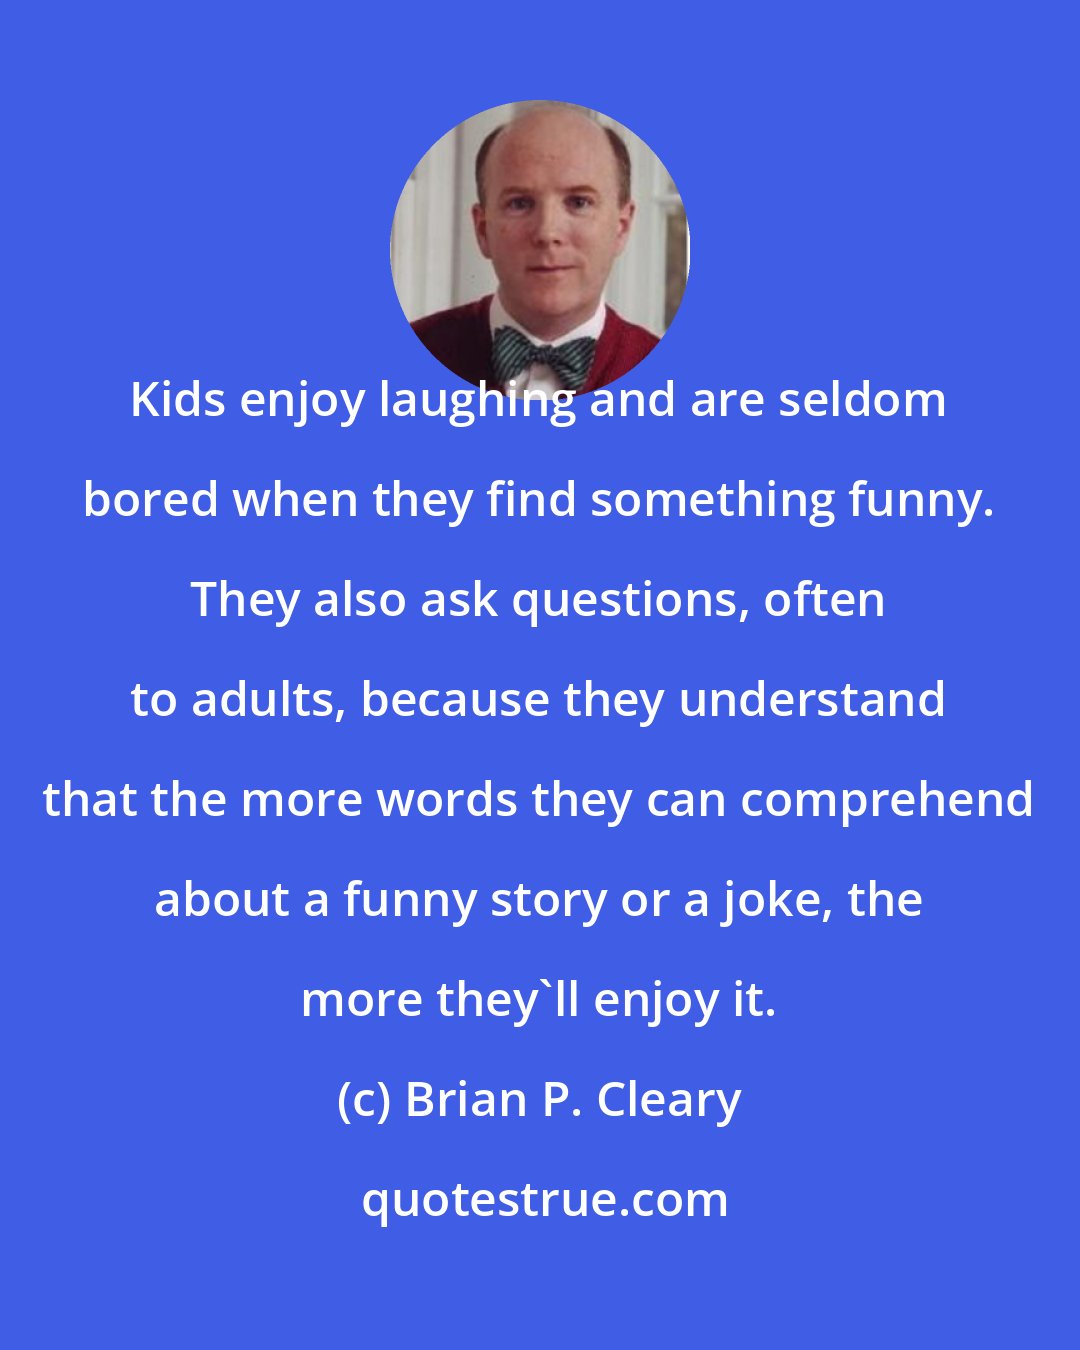 Brian P. Cleary: Kids enjoy laughing and are seldom bored when they find something funny. They also ask questions, often to adults, because they understand that the more words they can comprehend about a funny story or a joke, the more they'll enjoy it.